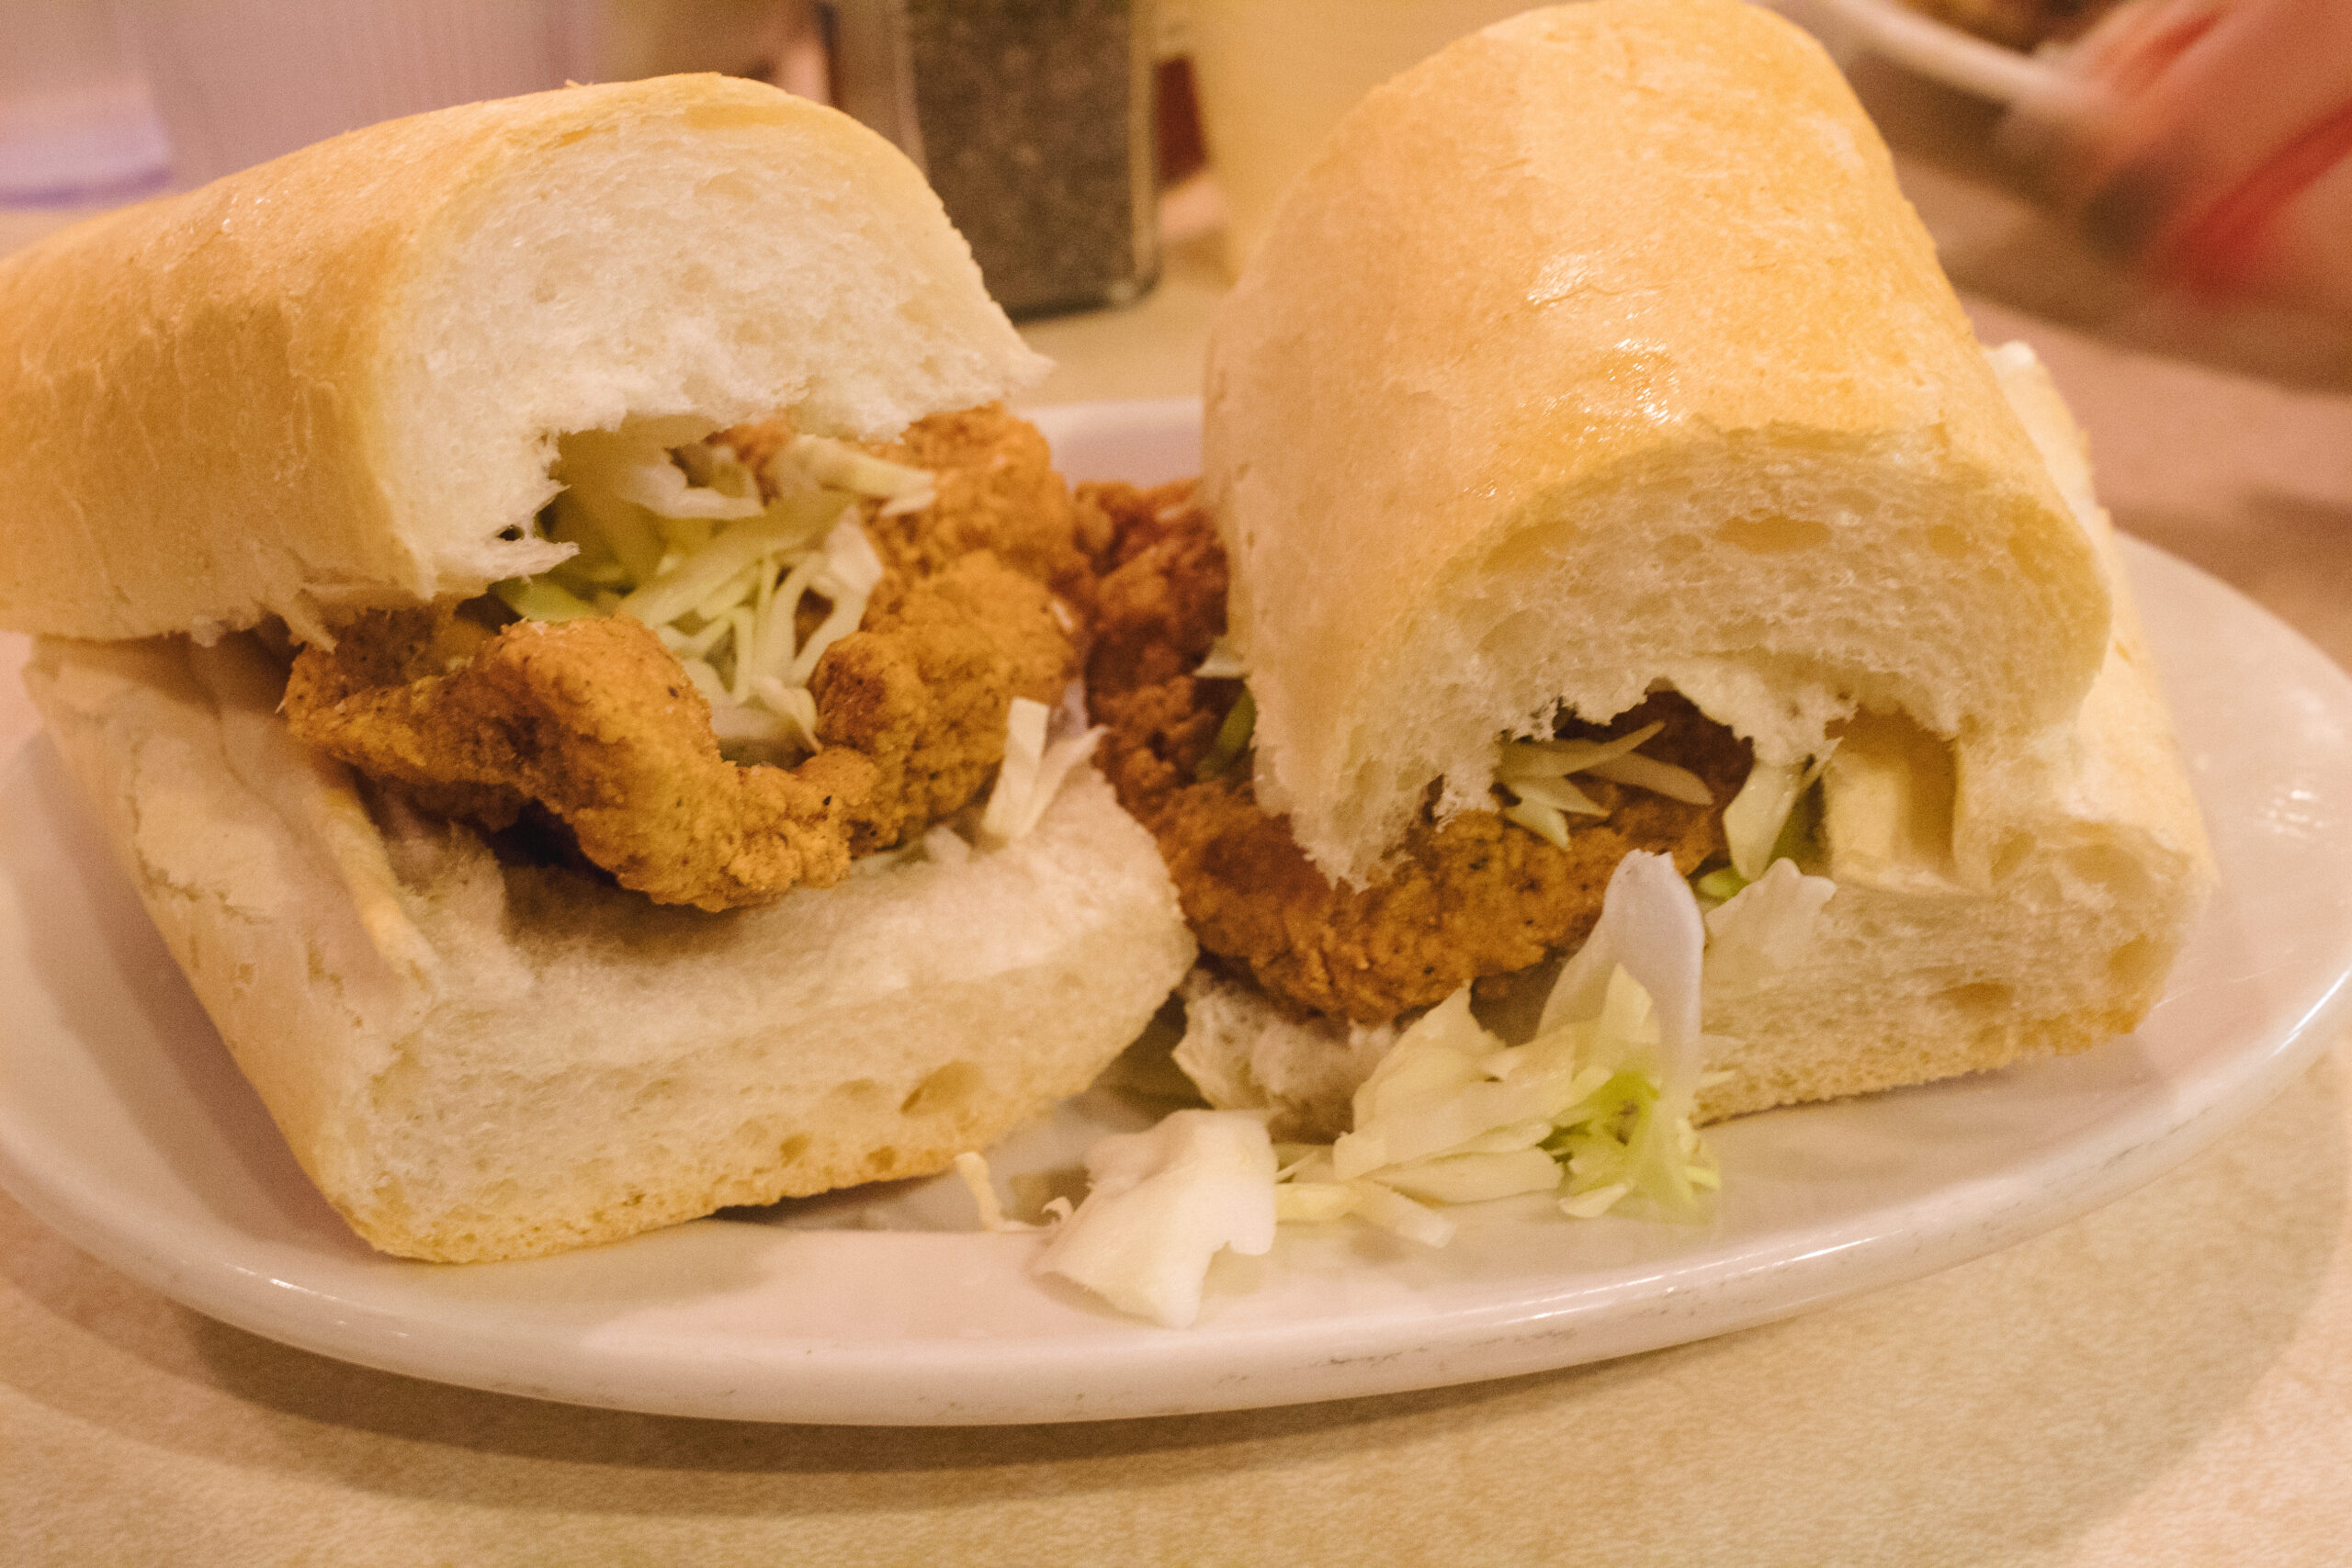 WHAT TO EAT IN NEW ORLEANS